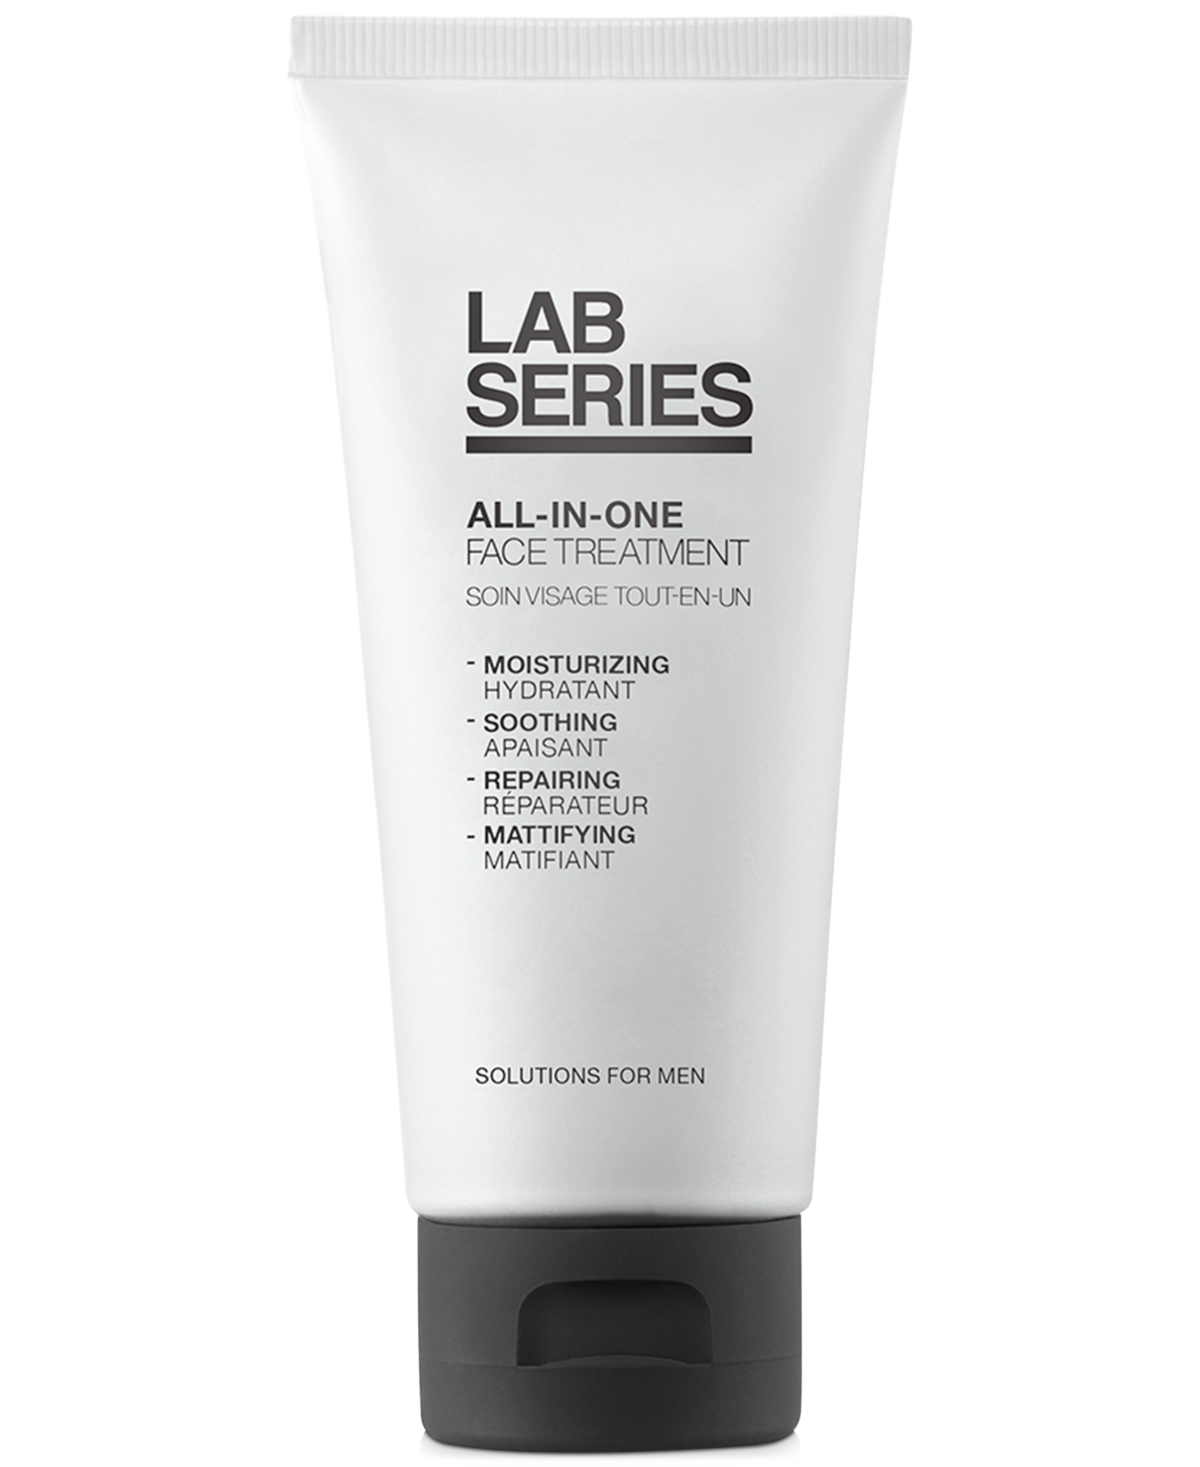 Skincare for Men All-In-One Face Treatment, 3.4-oz.